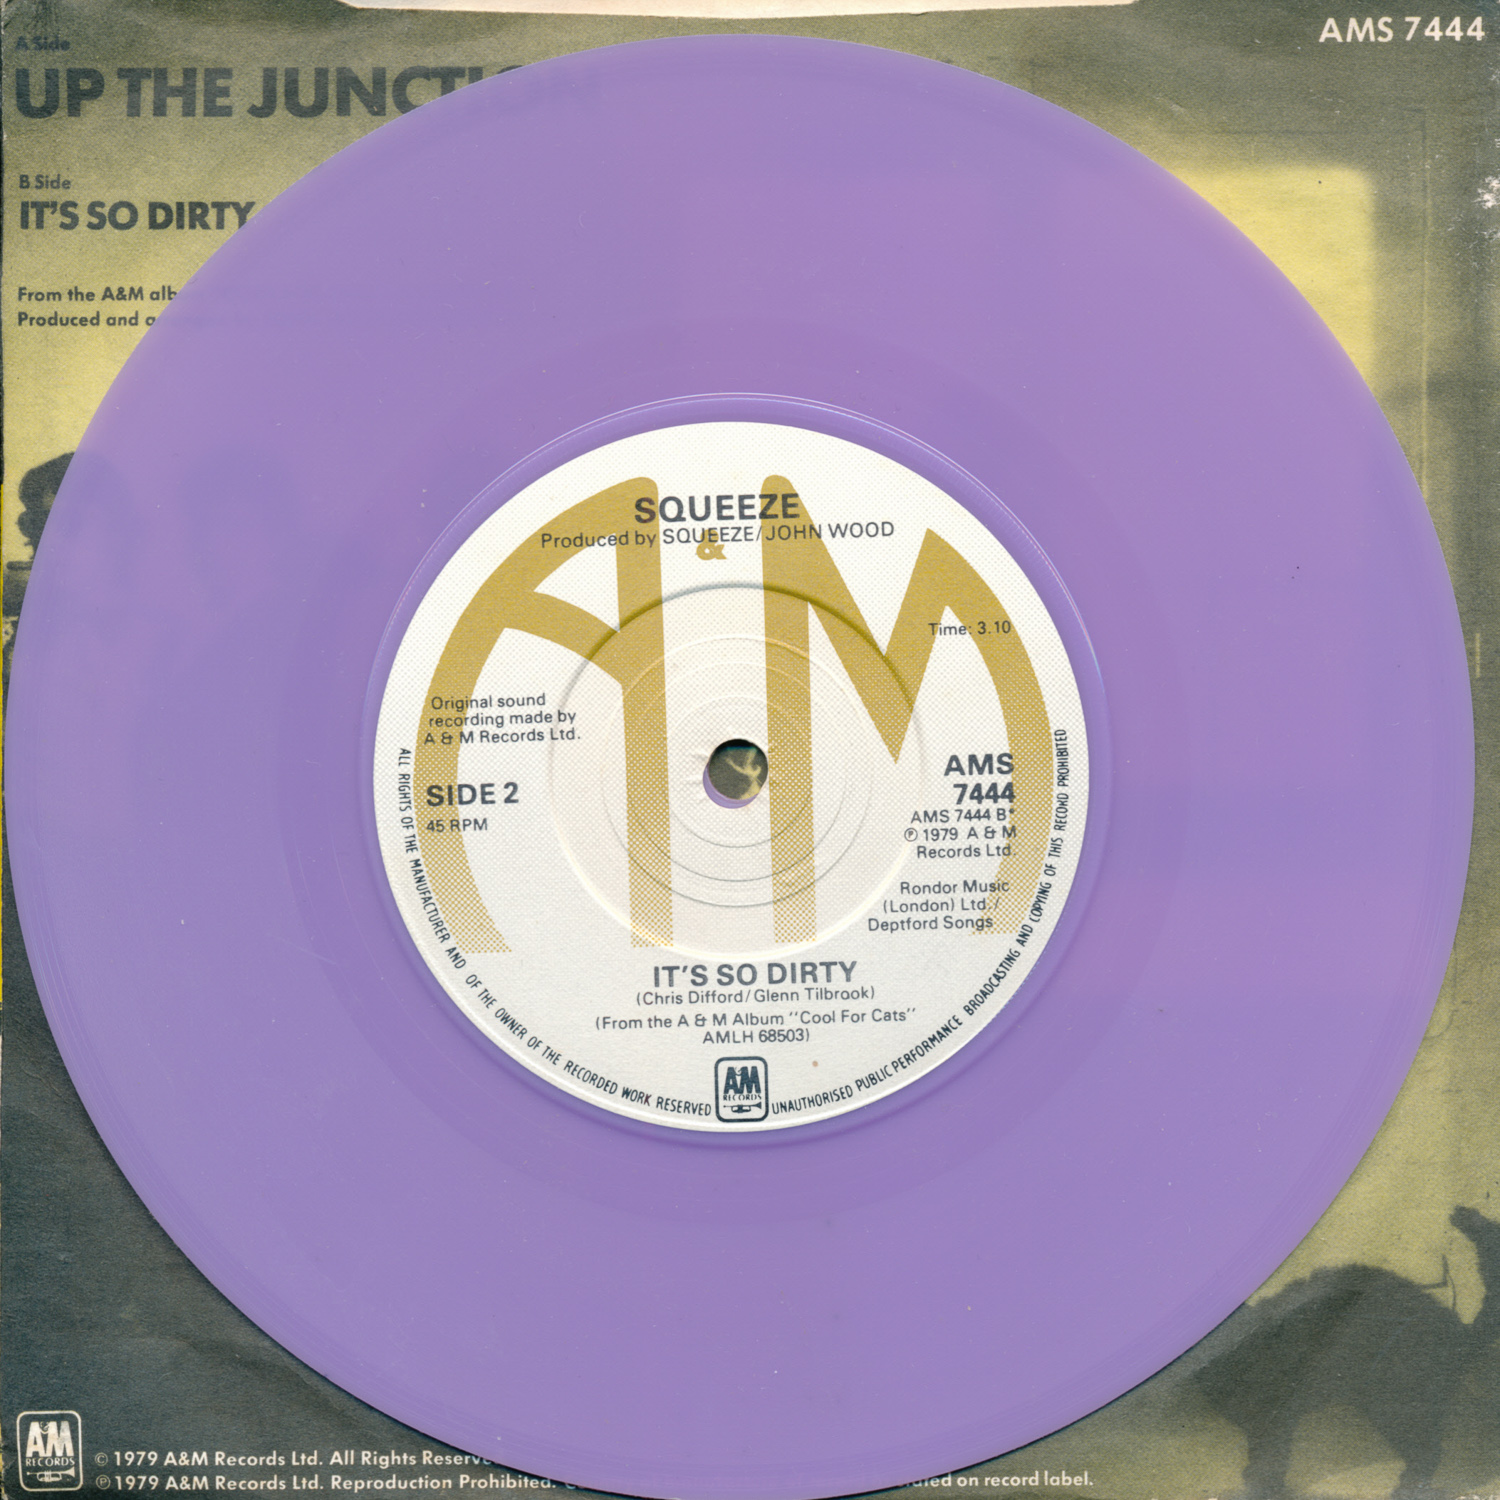 Up the Junction - brown label lilac vinyl